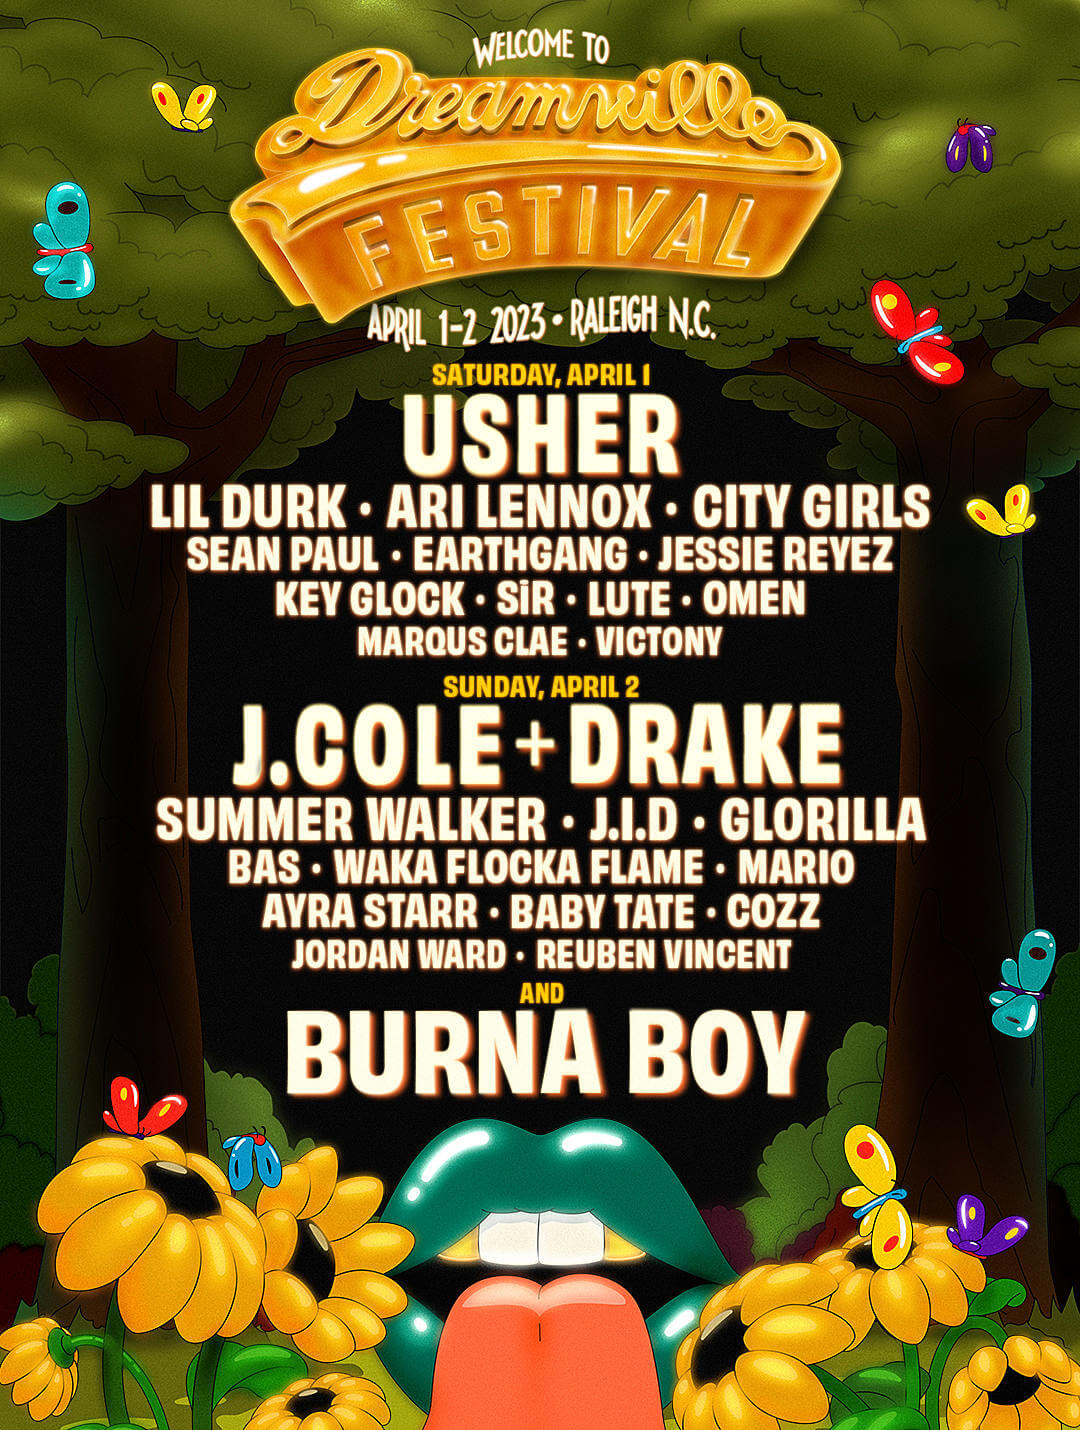 J. Cole and Drake Dreamville Festival 2023 Libeup and Schedule